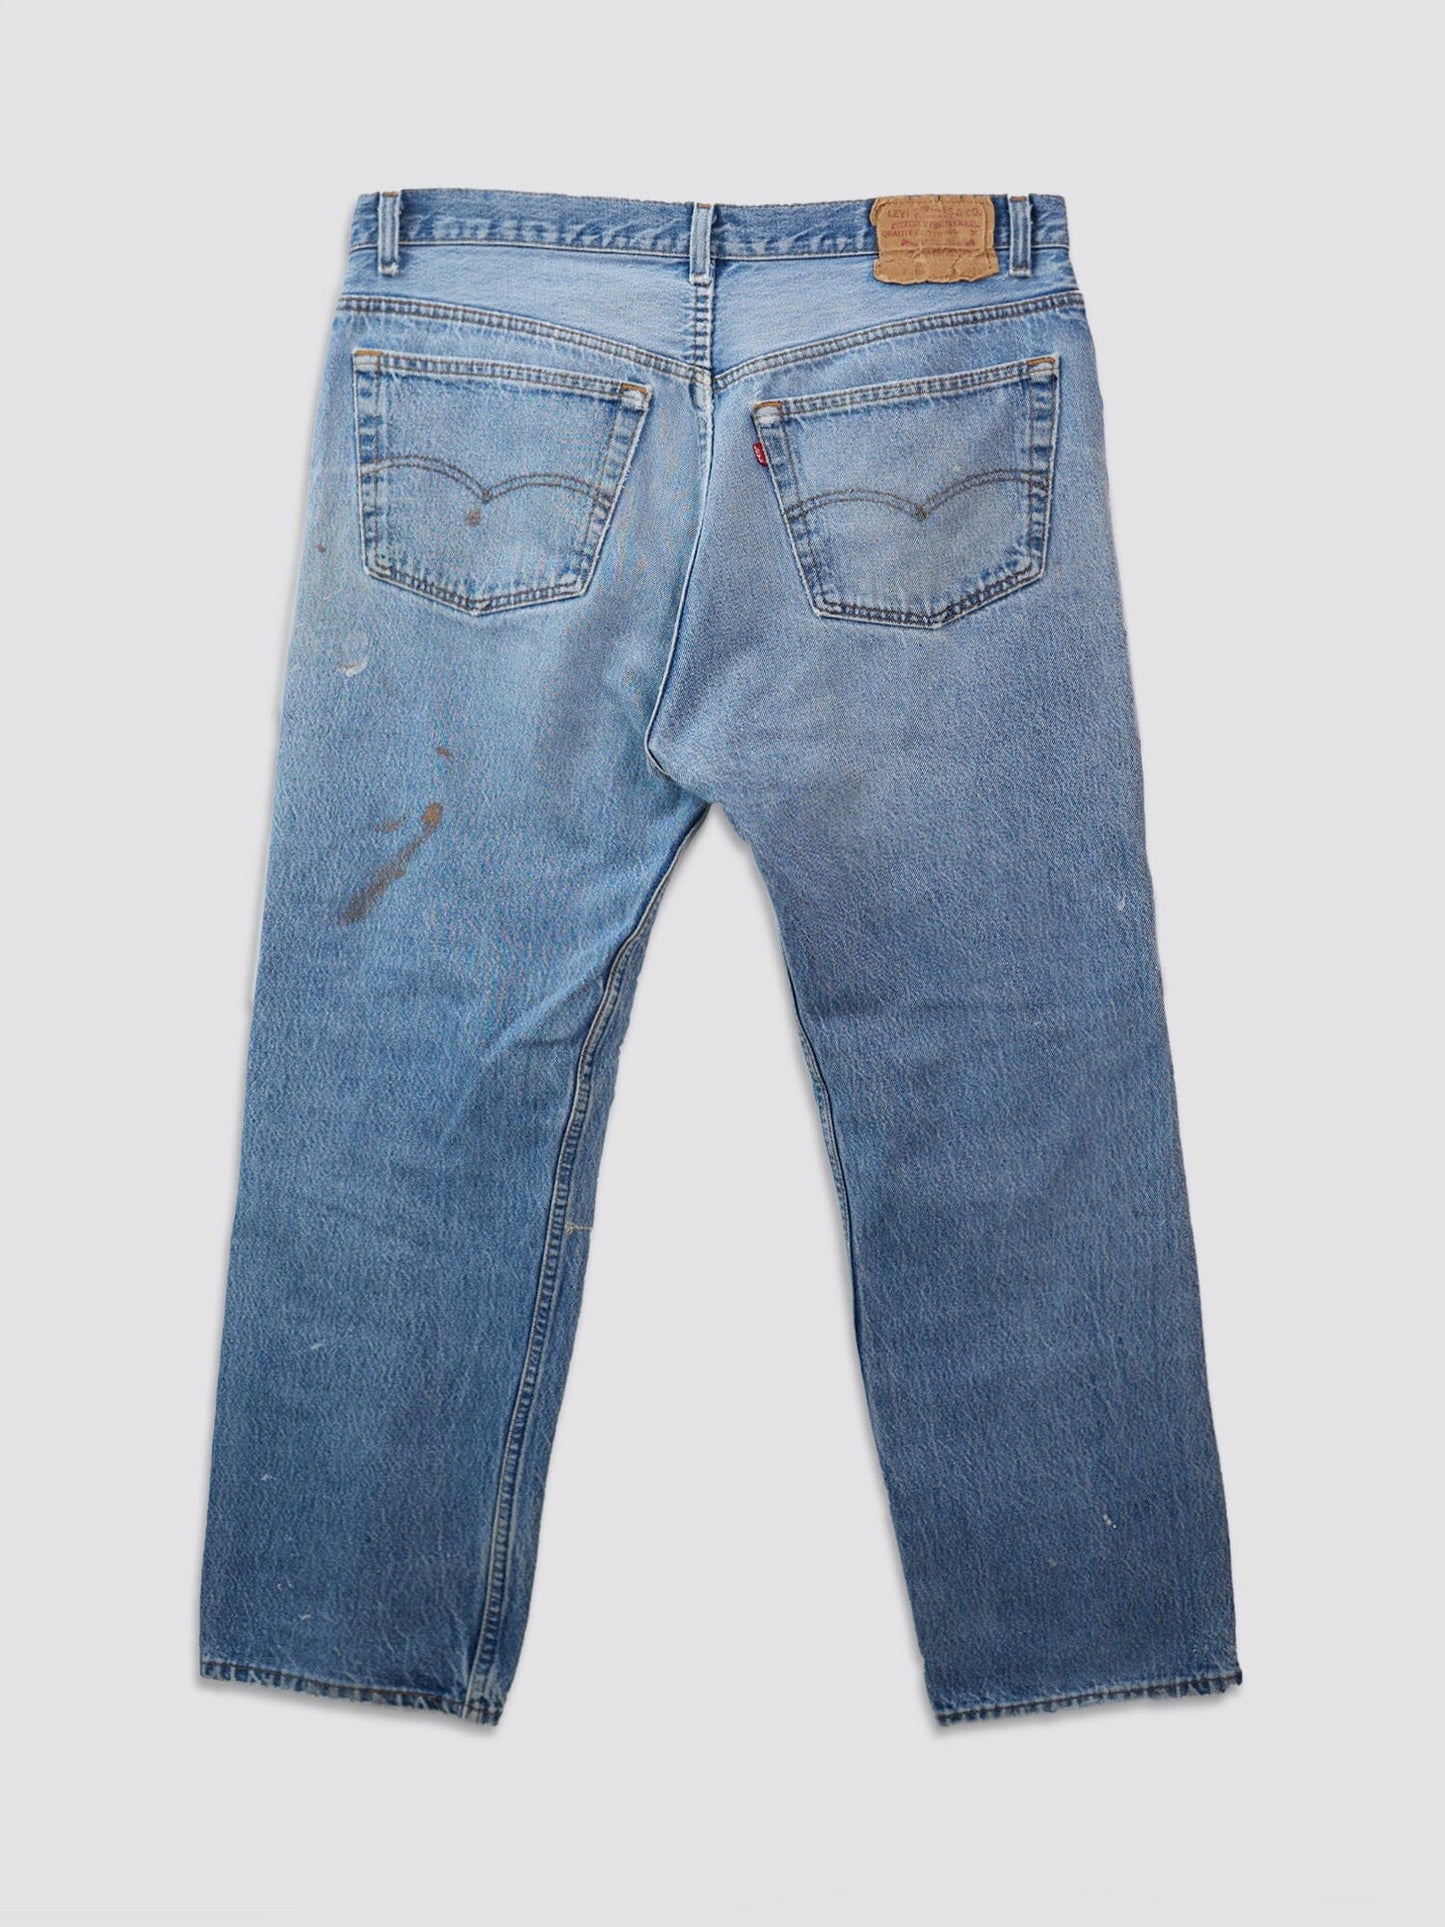 LEVIS 501 1980S REPAIRED RESUPPLY Alpha Industries 